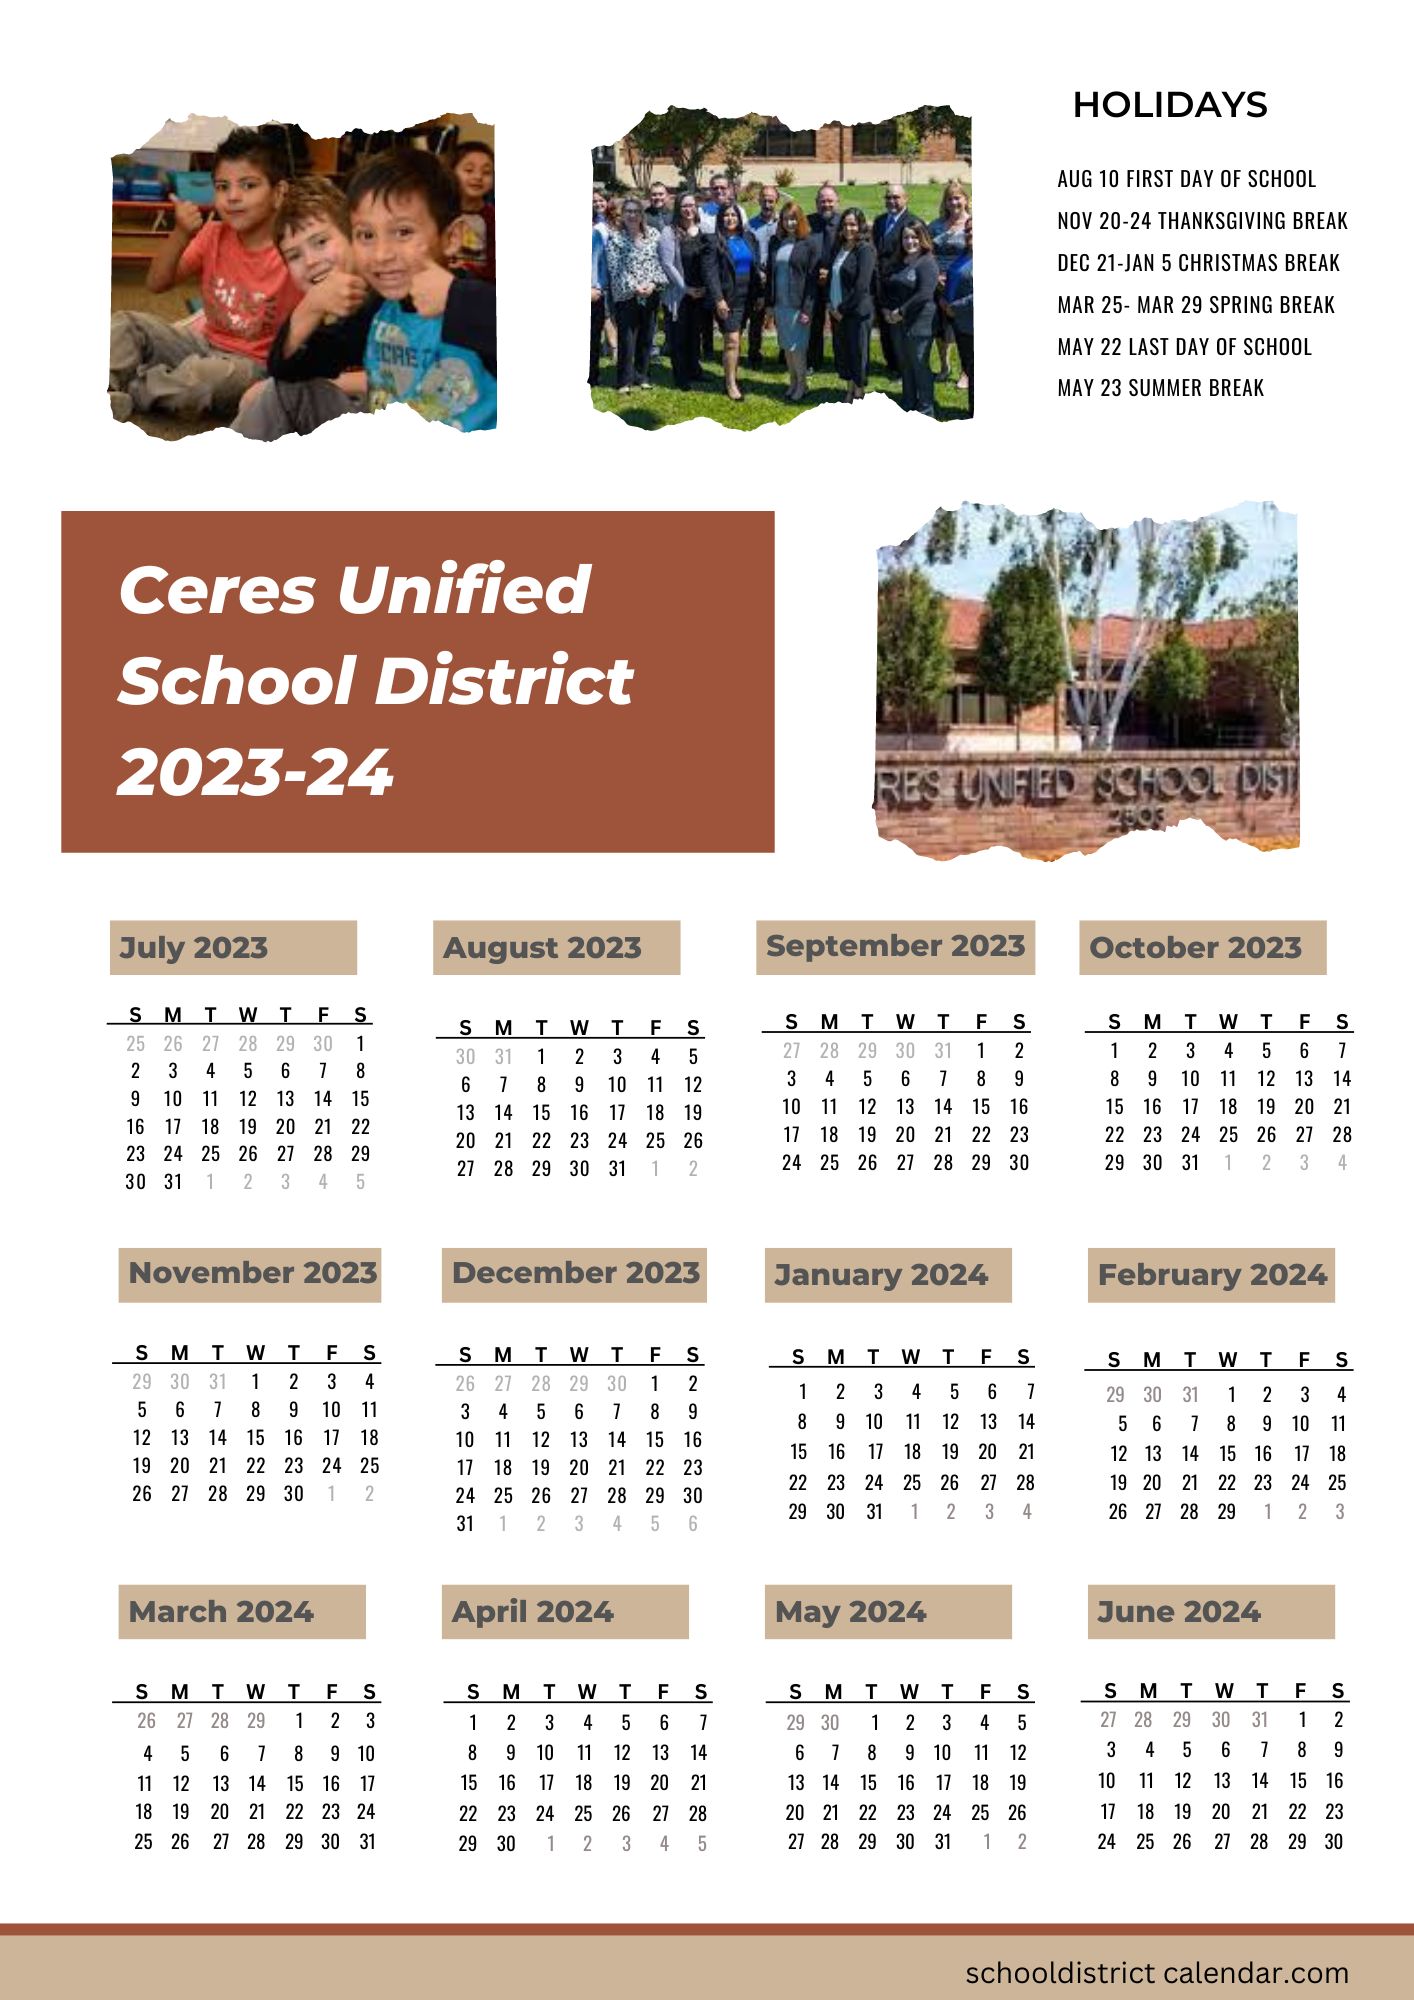 Ceres Unified School District Calendar Holidays 20232024